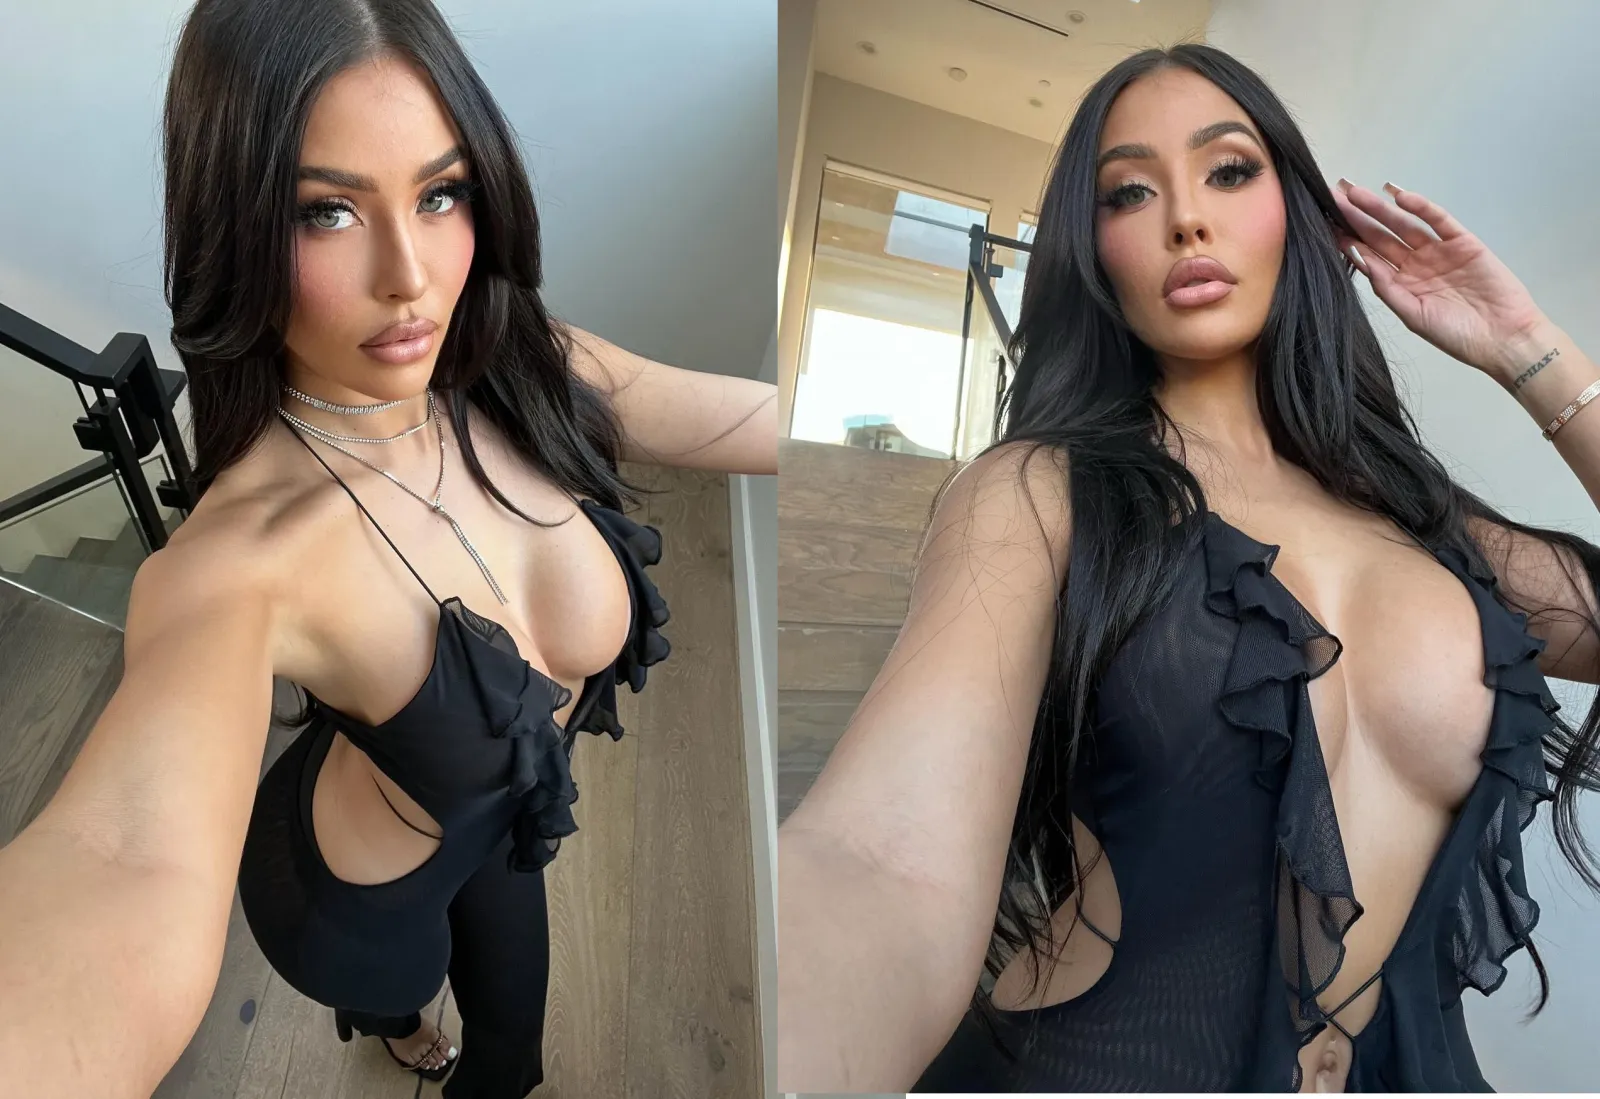 Fashion Nova Unleashes Showstopper Arlene Mesh Jumpsuit Takes Instagram by Storm with Cheeky Caption